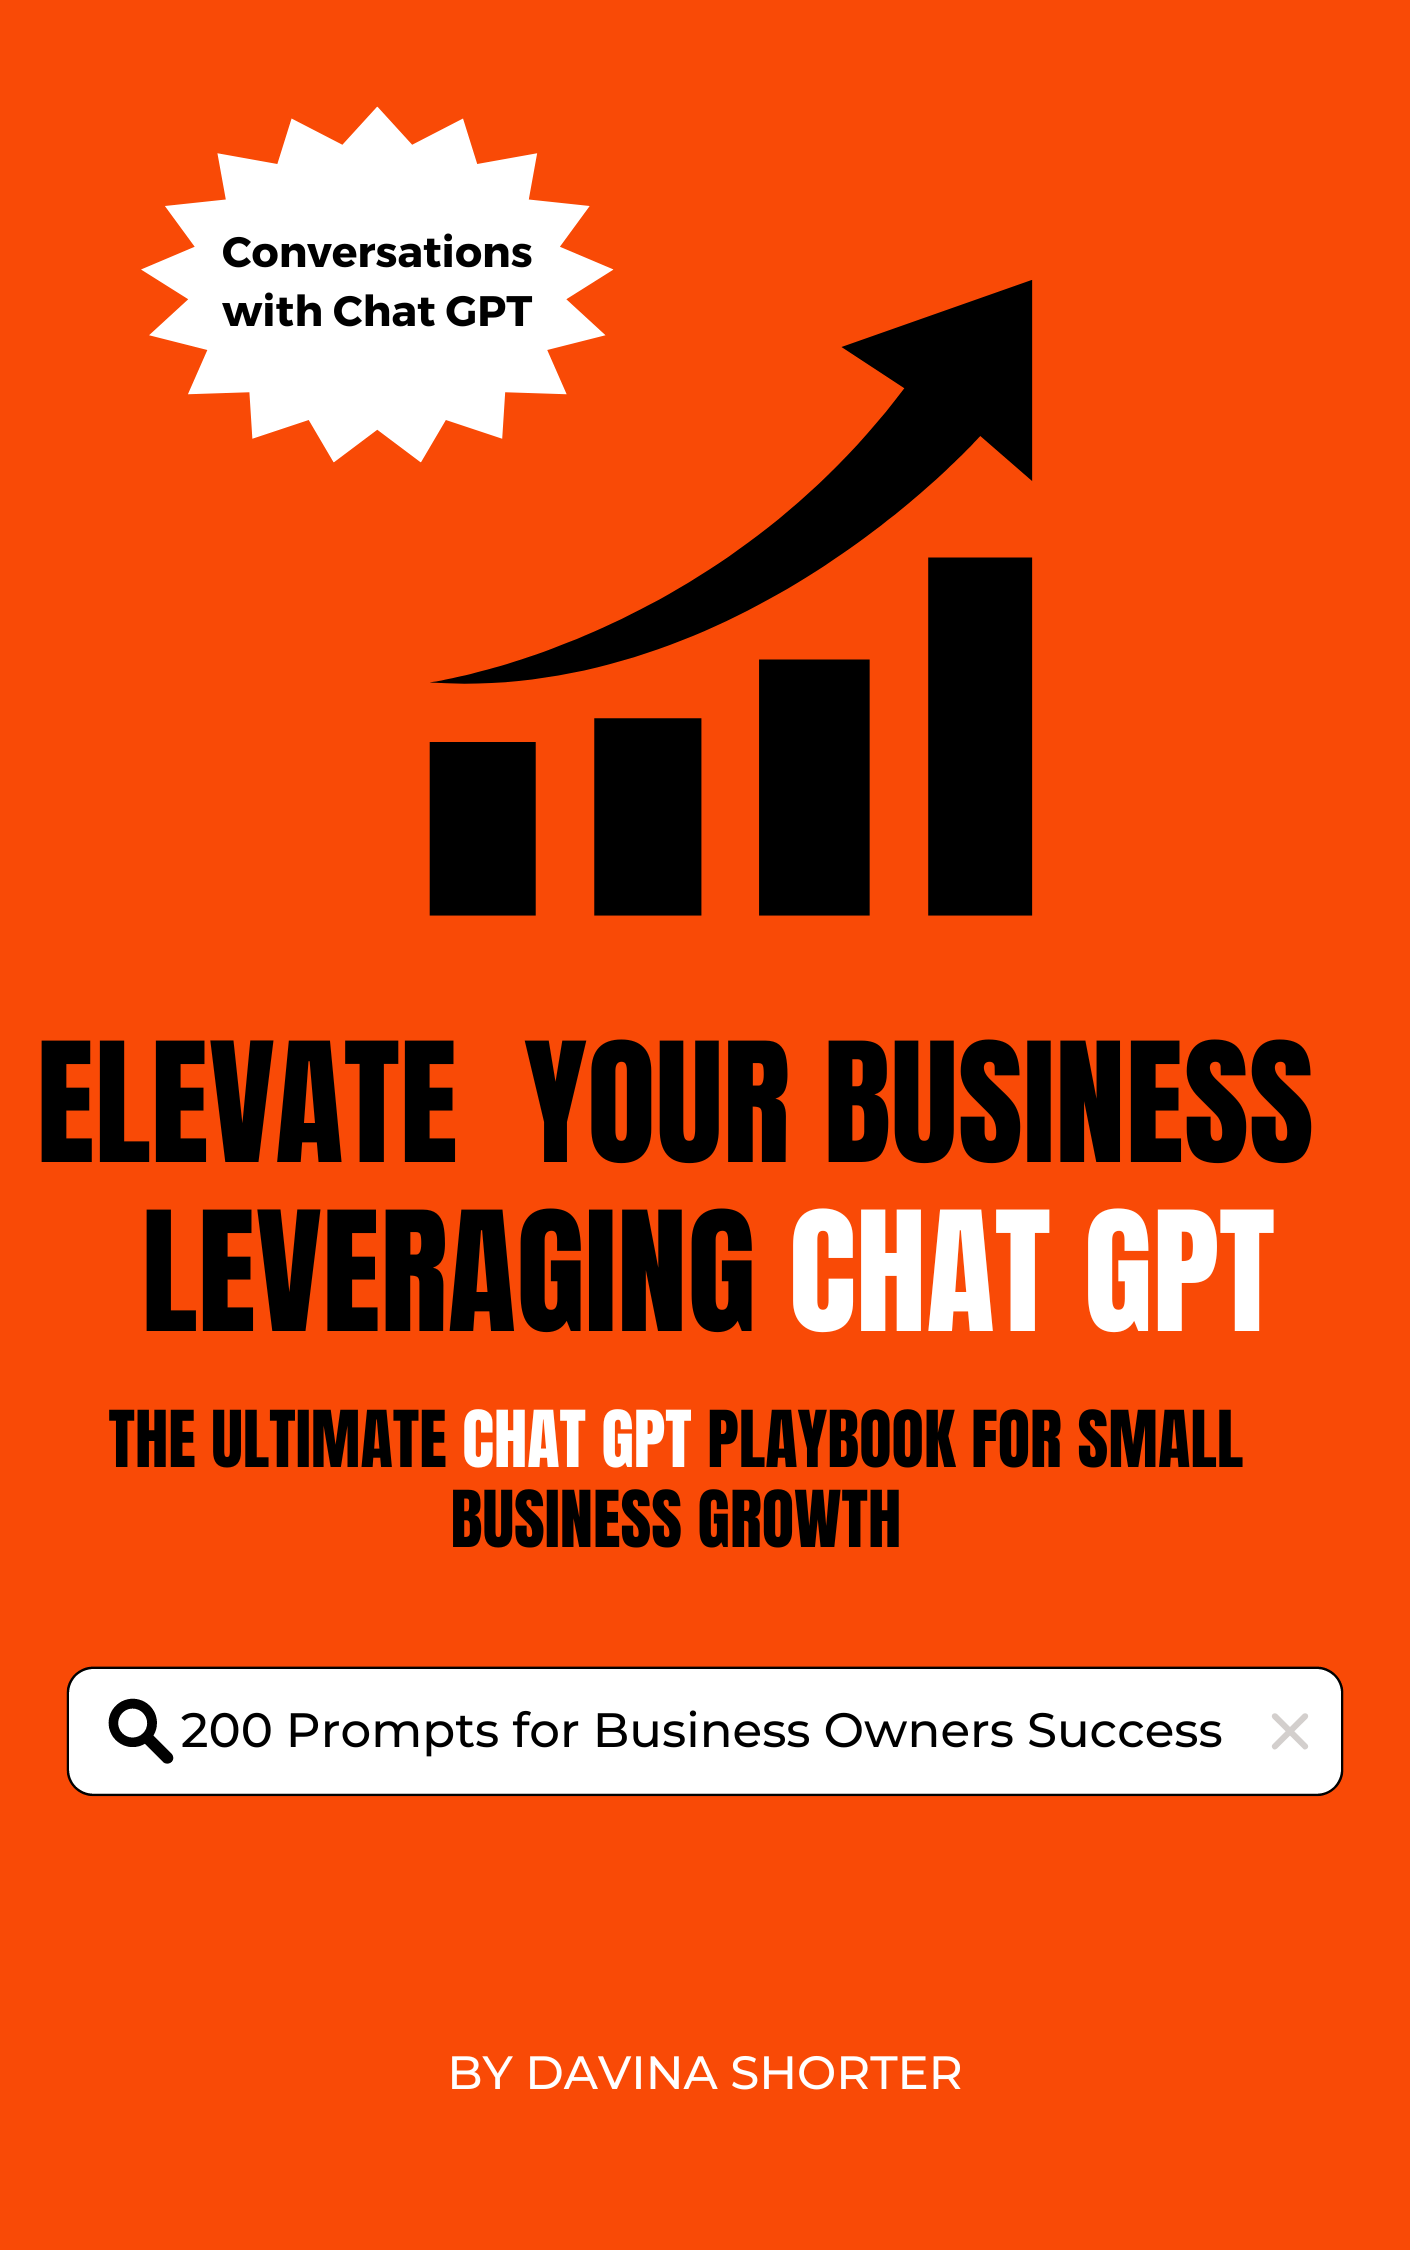 Elevate your business leveraging chat gpt. The ultimate chat gpt playbook for small business growth. 200 prompts for business owner success 